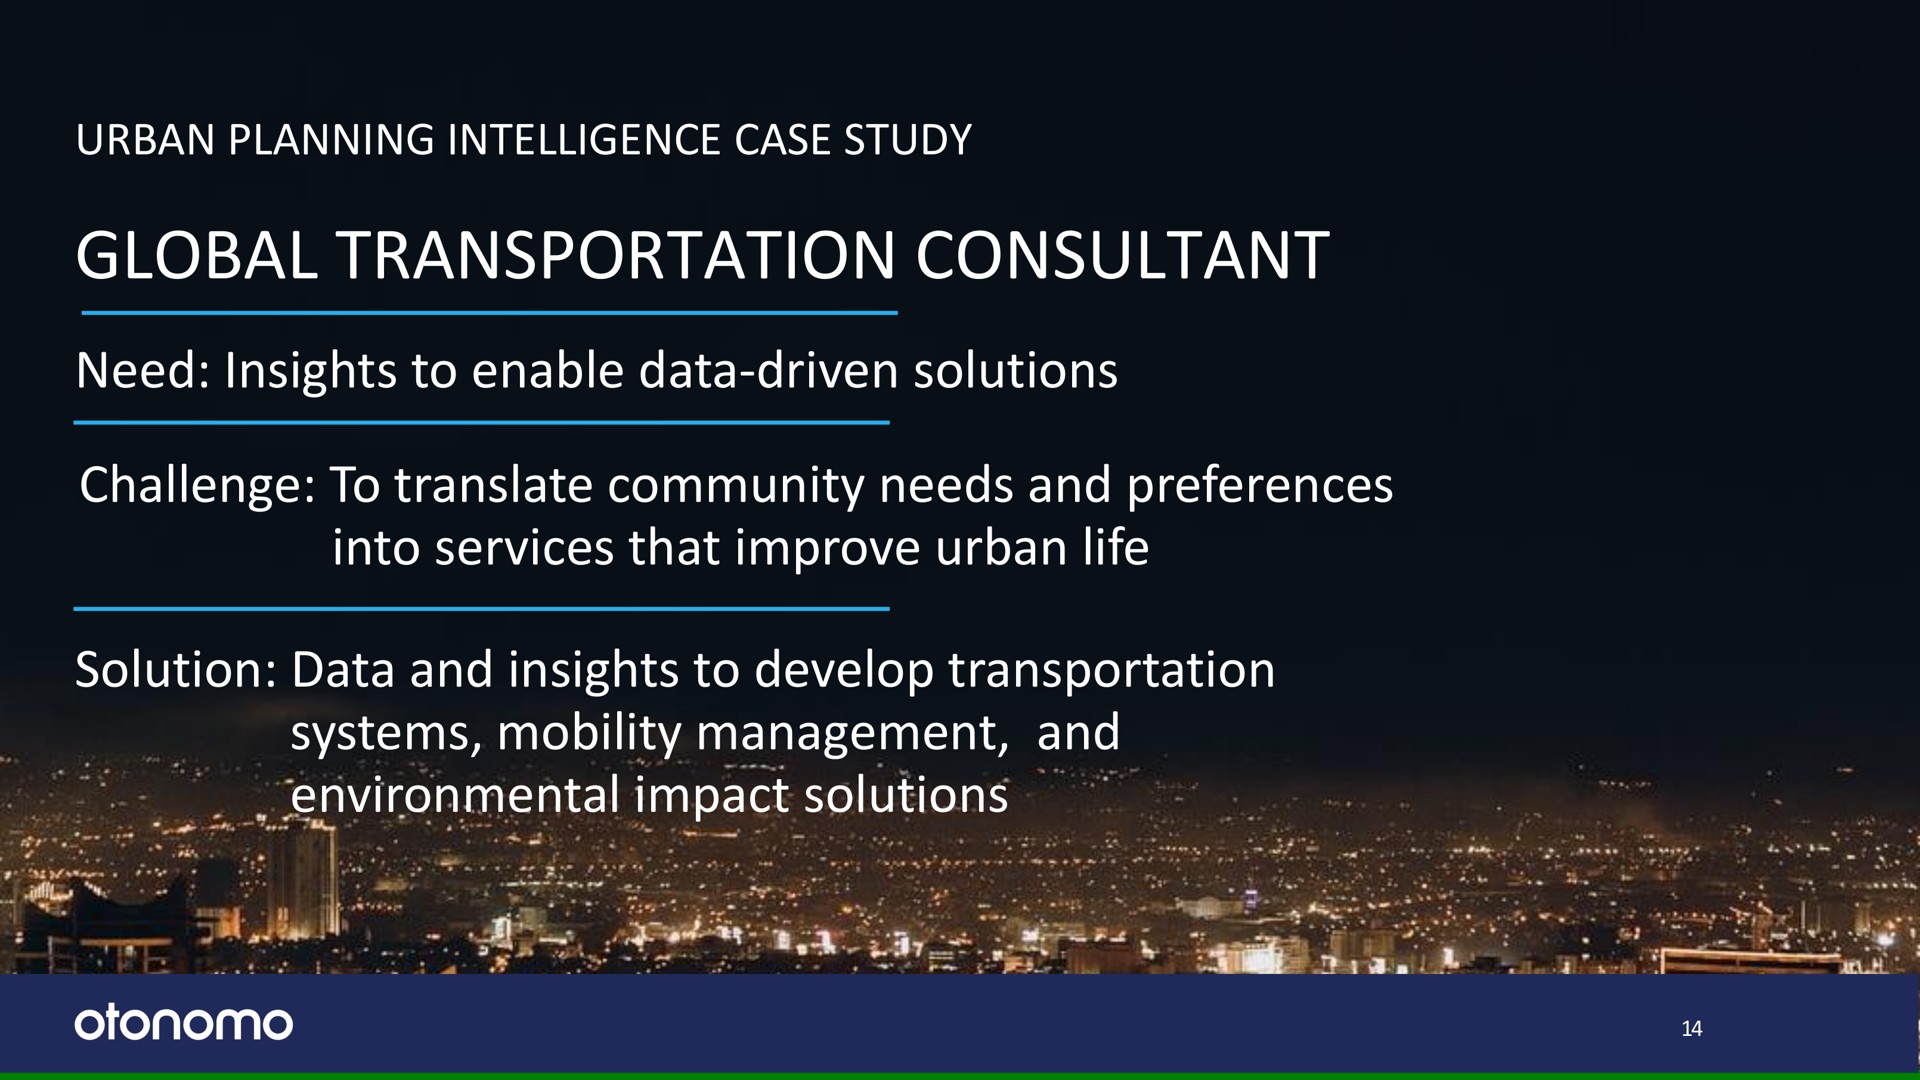 urban planning intelligence case study global transportation consultant need insights to enable data driven solutions challenge to translate community needs and preferences into services that improve urban life solution data and insights to develop transportation systems mobility management and environmental impact solutions me a stout a | Otonomo